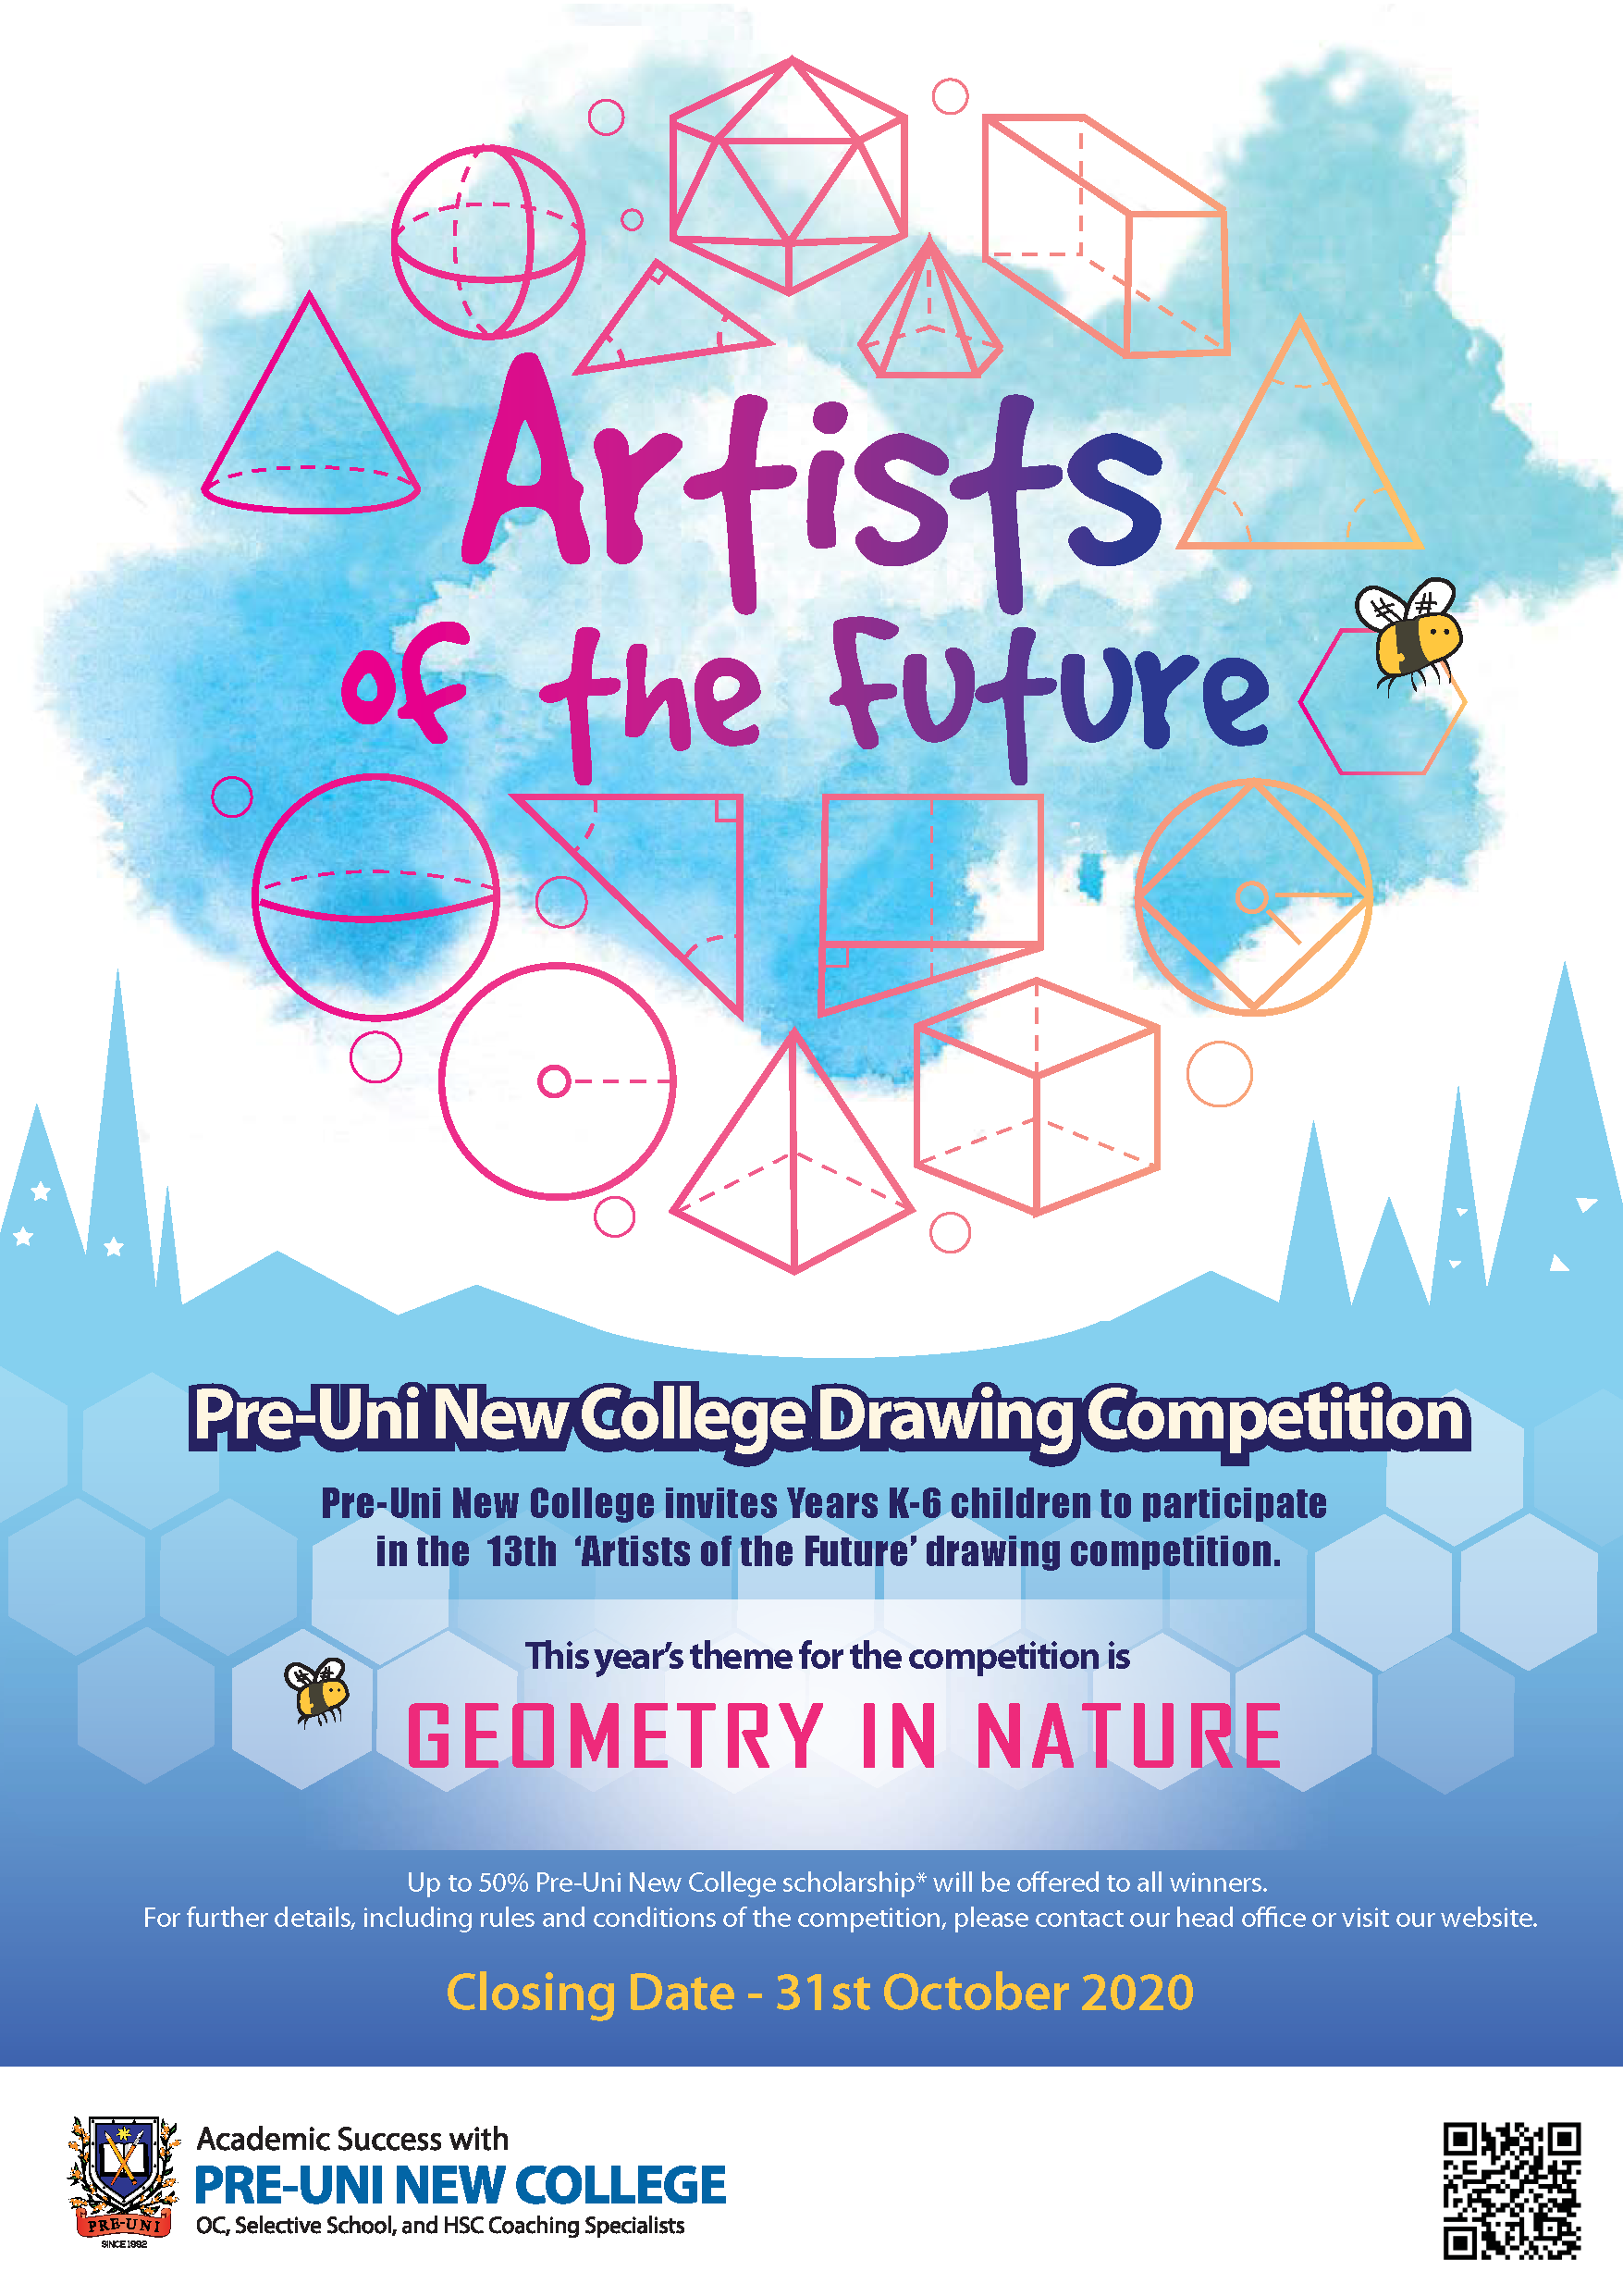 EWC holds Nature Art Competition '15 | FCC Societies